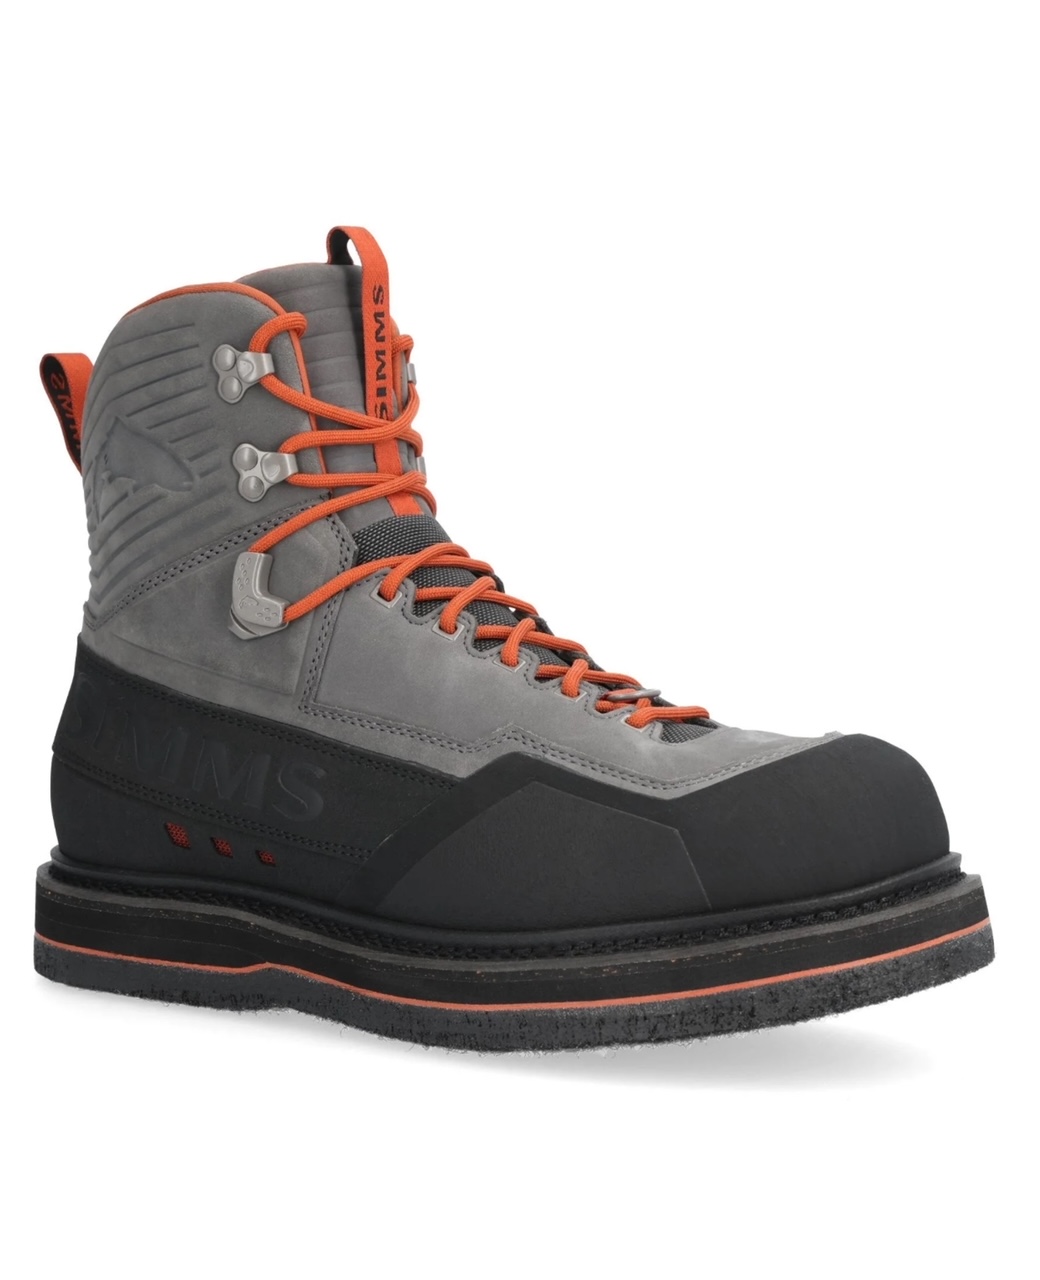 Simms Fishing G3 Guide Boots